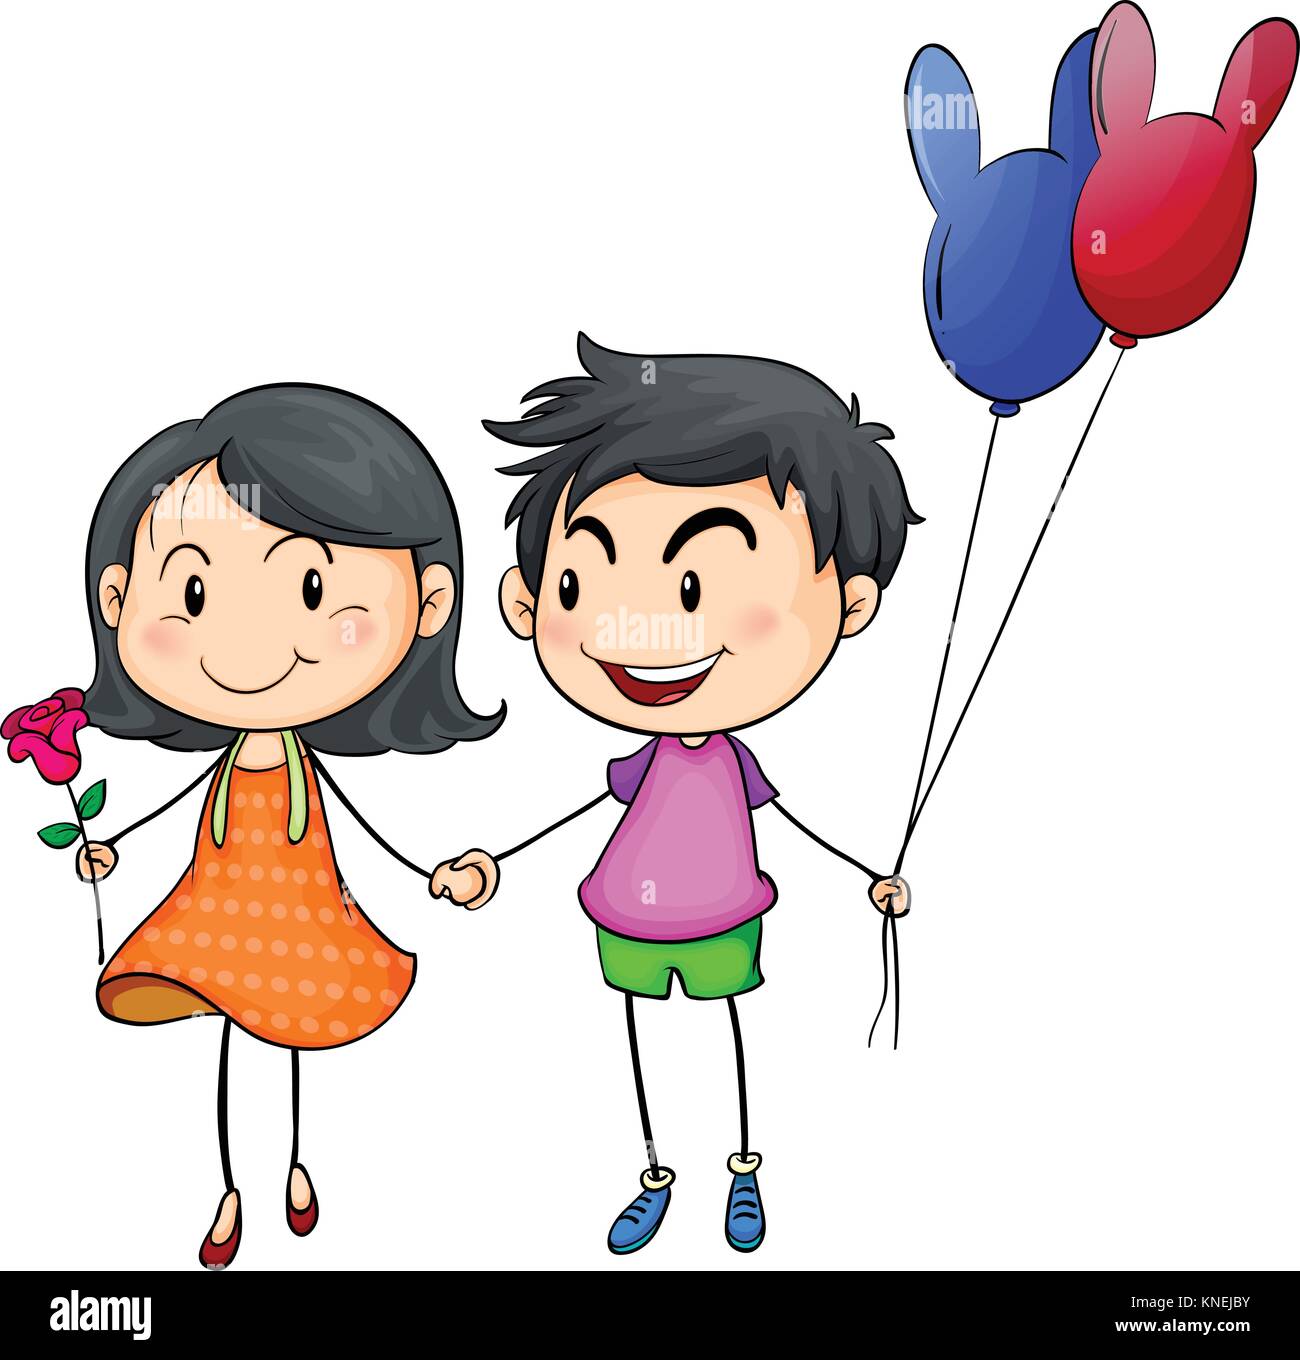 Illustration of a boy and a girl holding hands on a white background Stock Vector